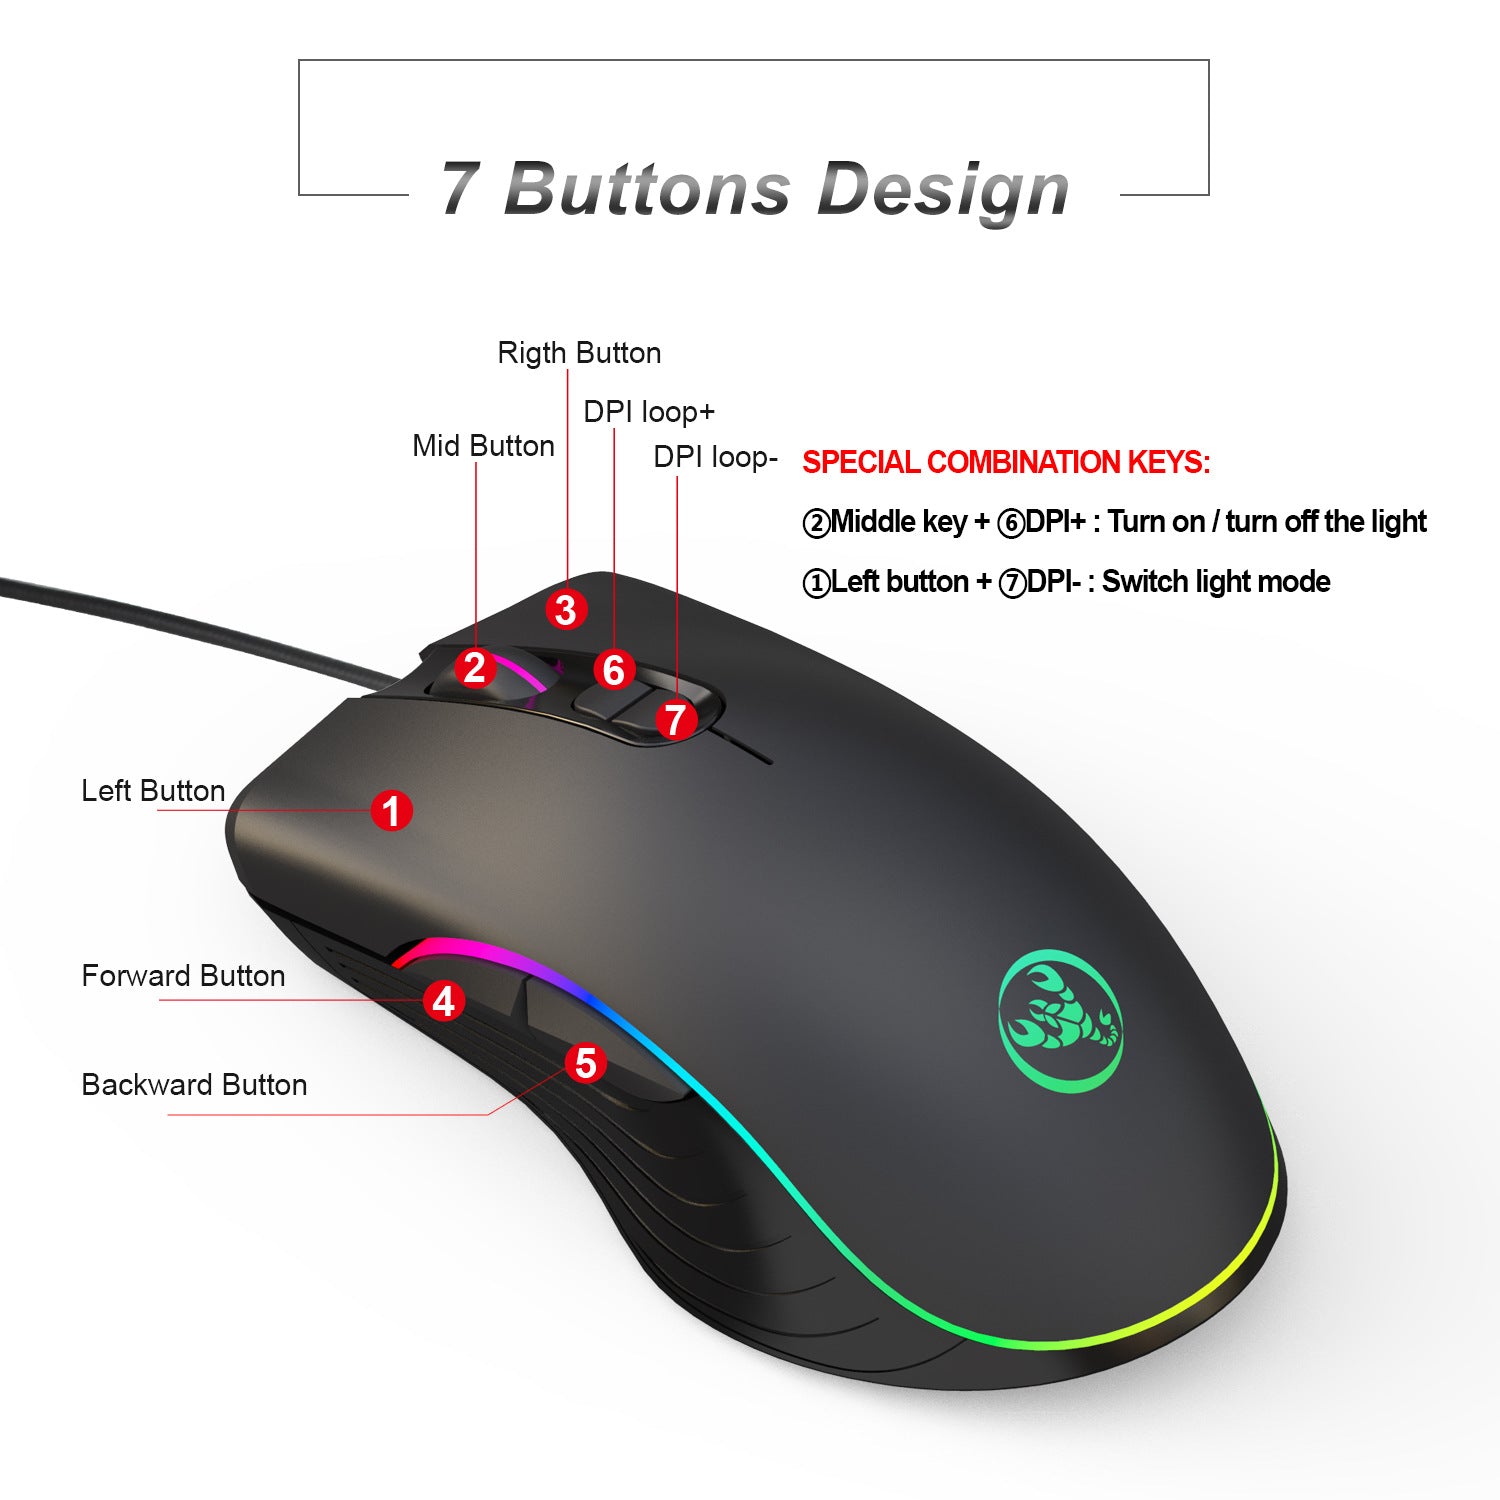 Illuminated Wired Gaming Mouse for Enhanced Gaming Experience